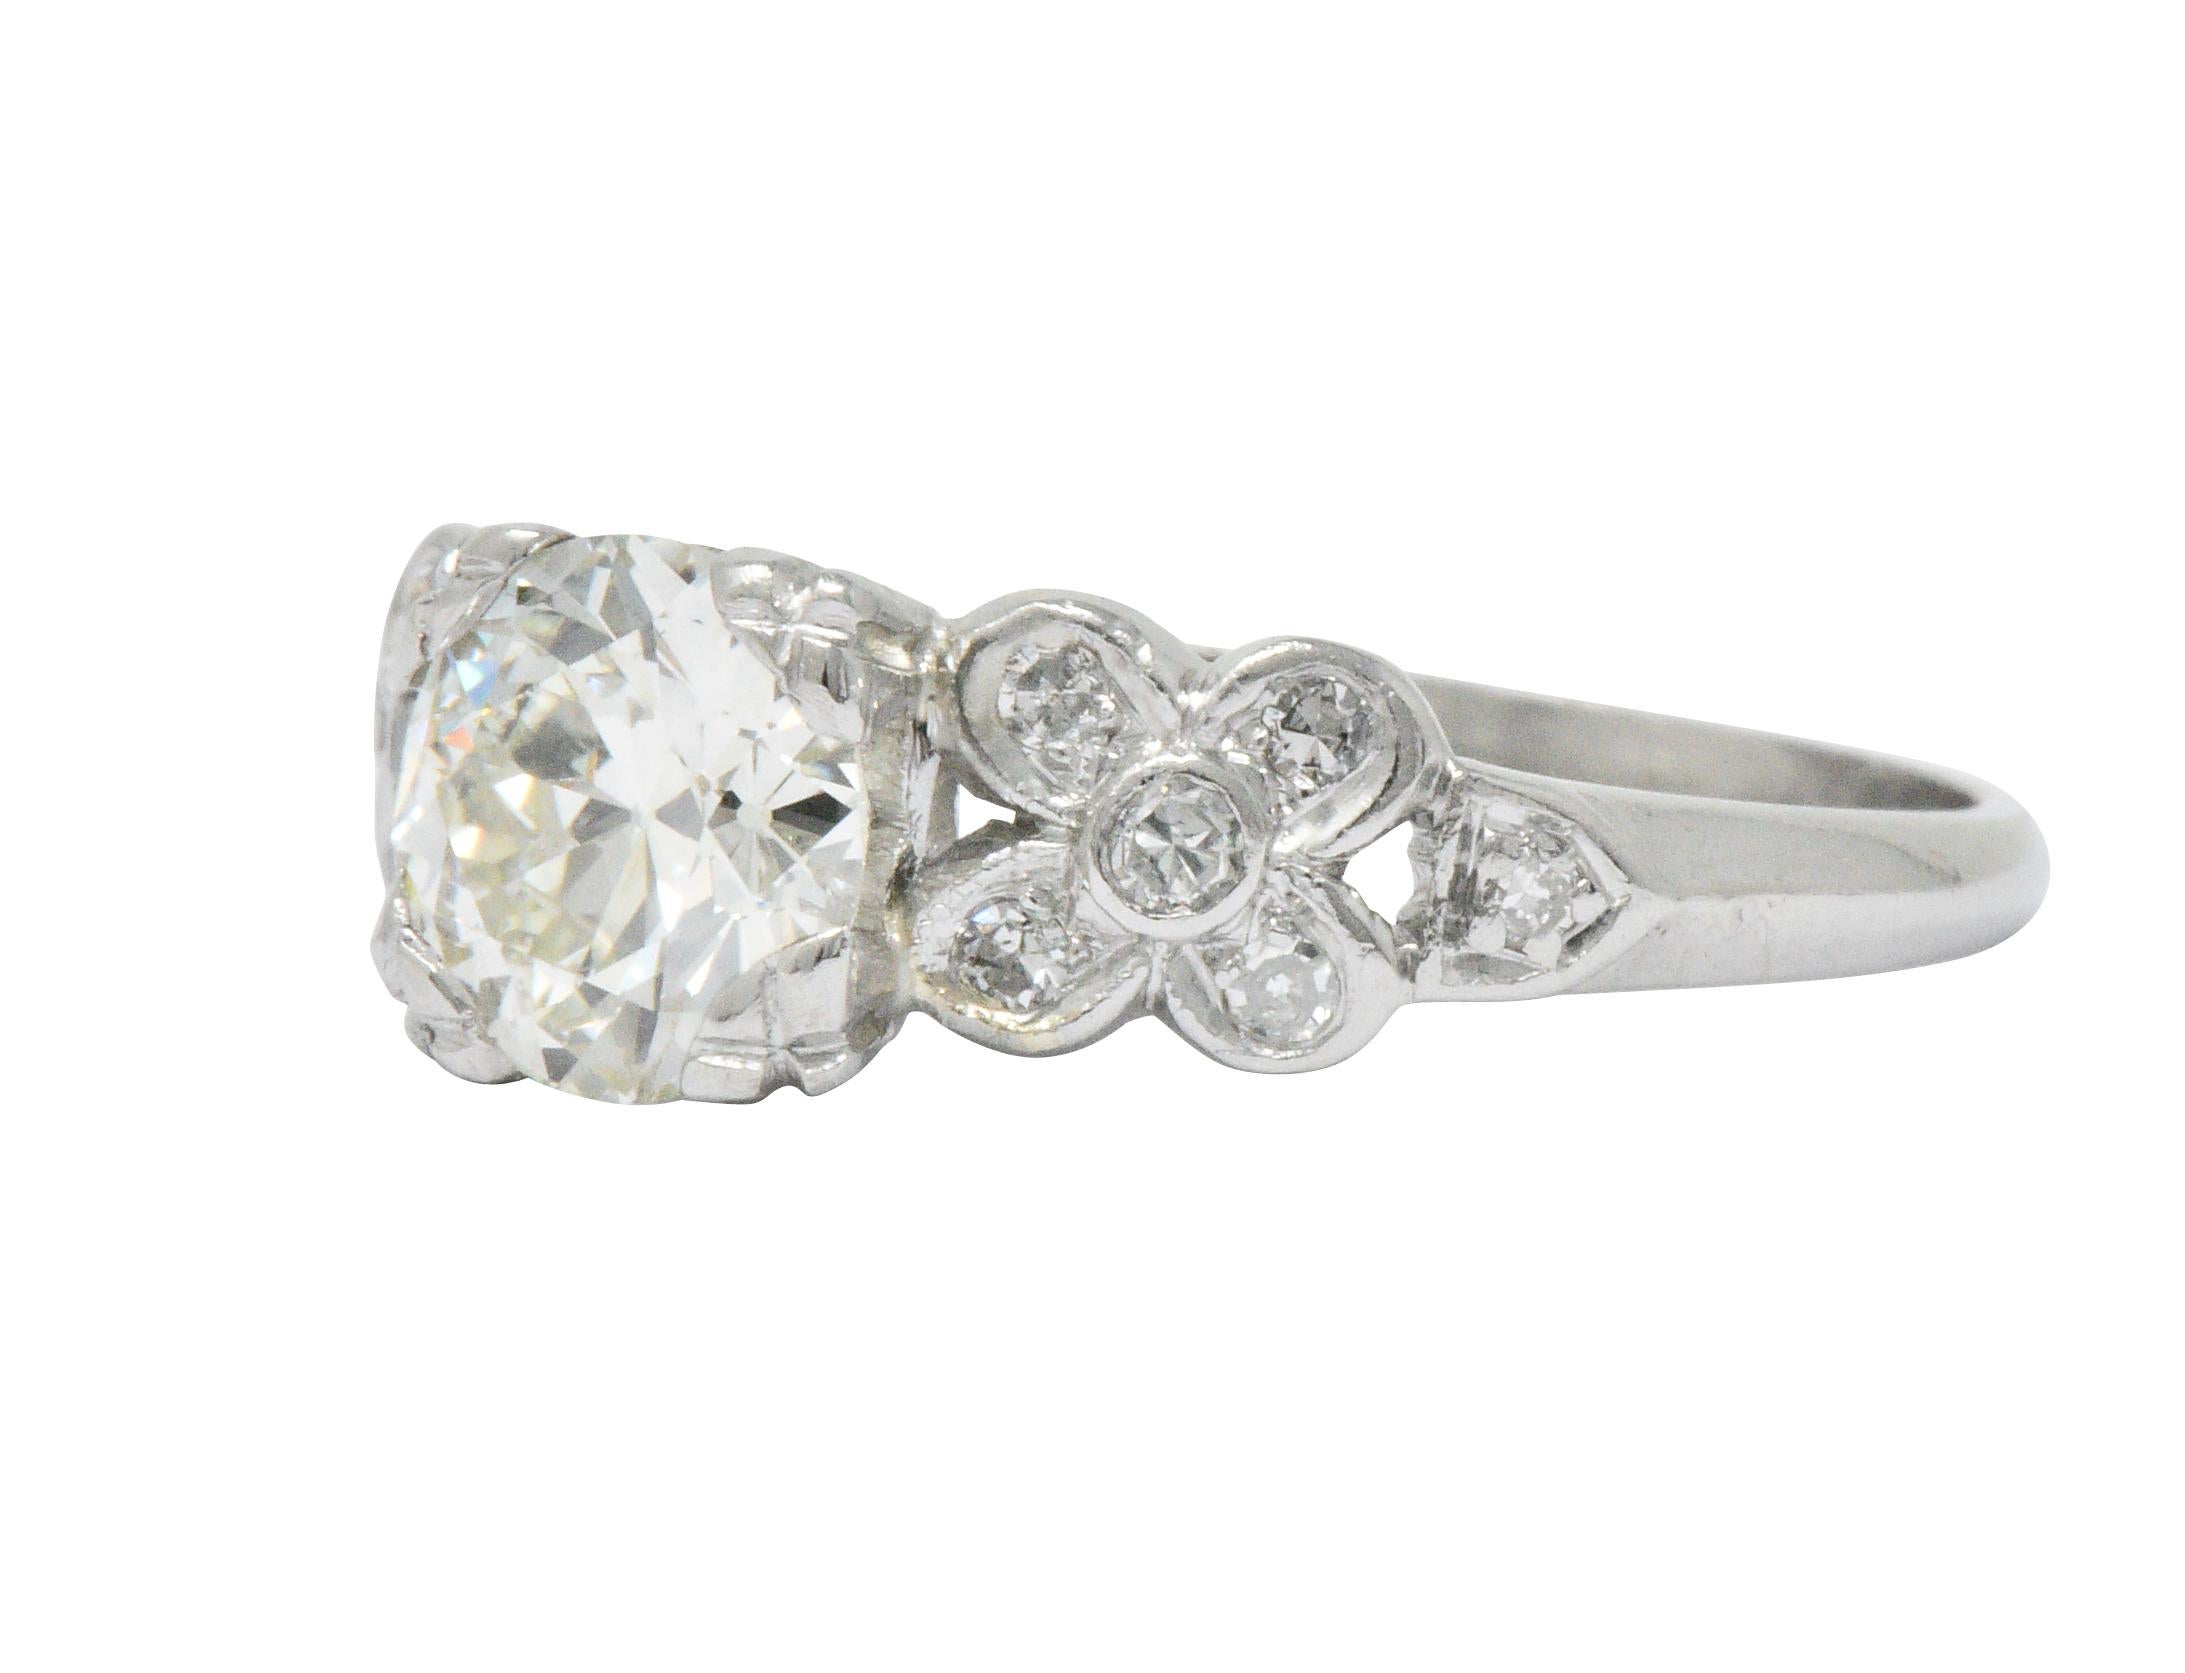 Centering an old European cut diamond, set securely with decorative prongs, weighing 1.10 carats; L color with VS1 clarity

Flanked by floral motif shoulders accented by single cut diamonds, weighing approximately 0.11 carat total; eye-clean and